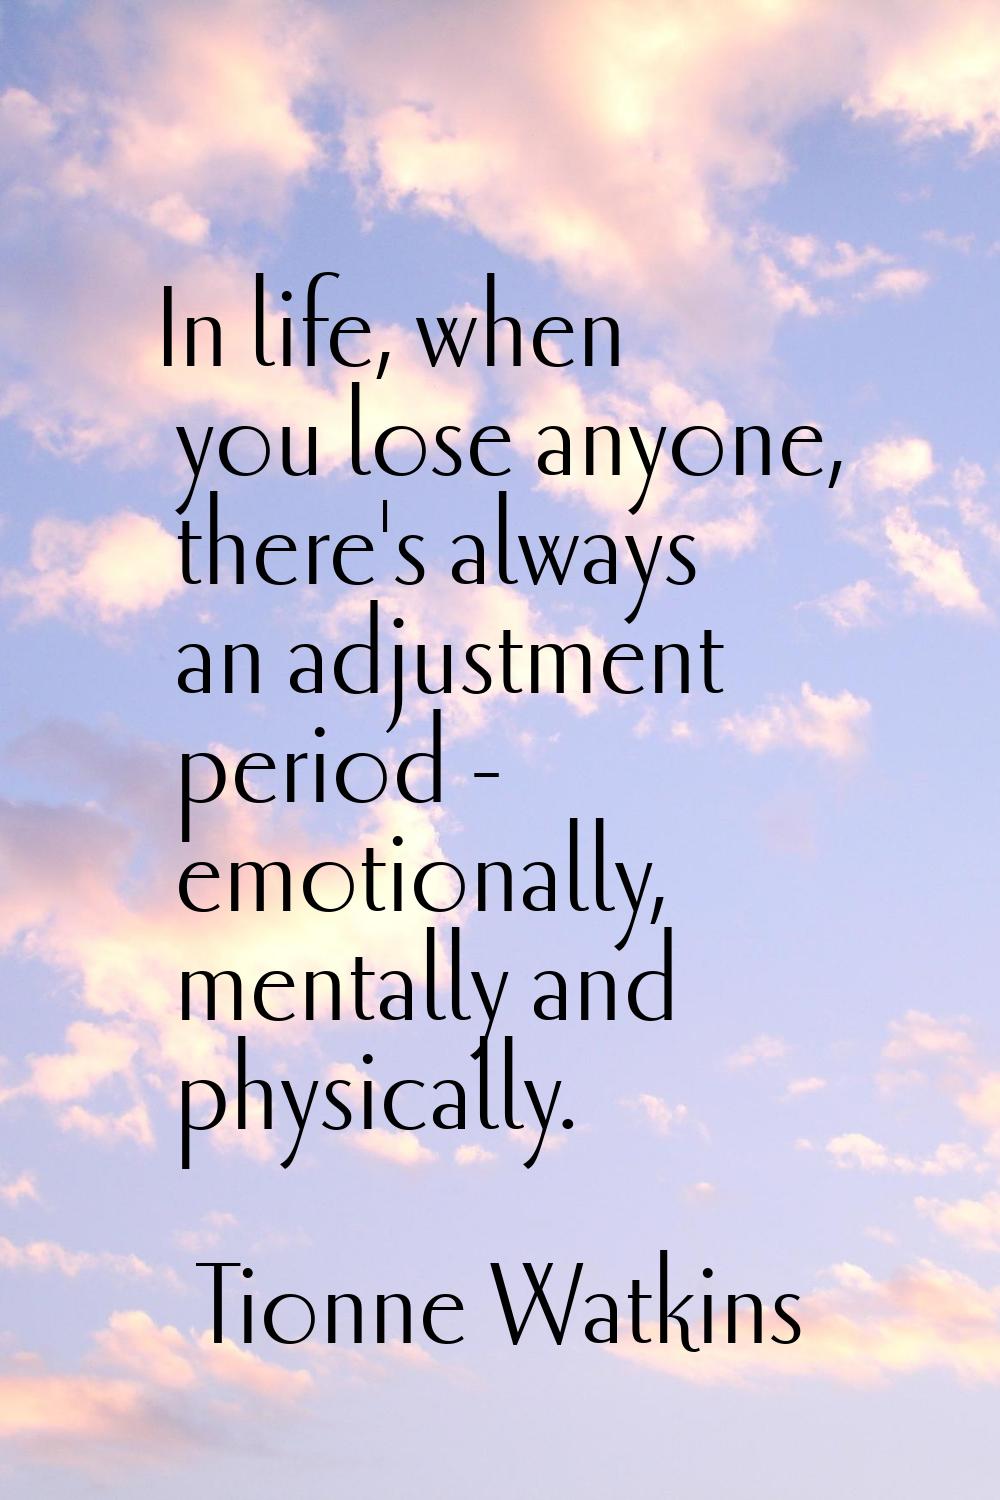 In life, when you lose anyone, there's always an adjustment period - emotionally, mentally and phys